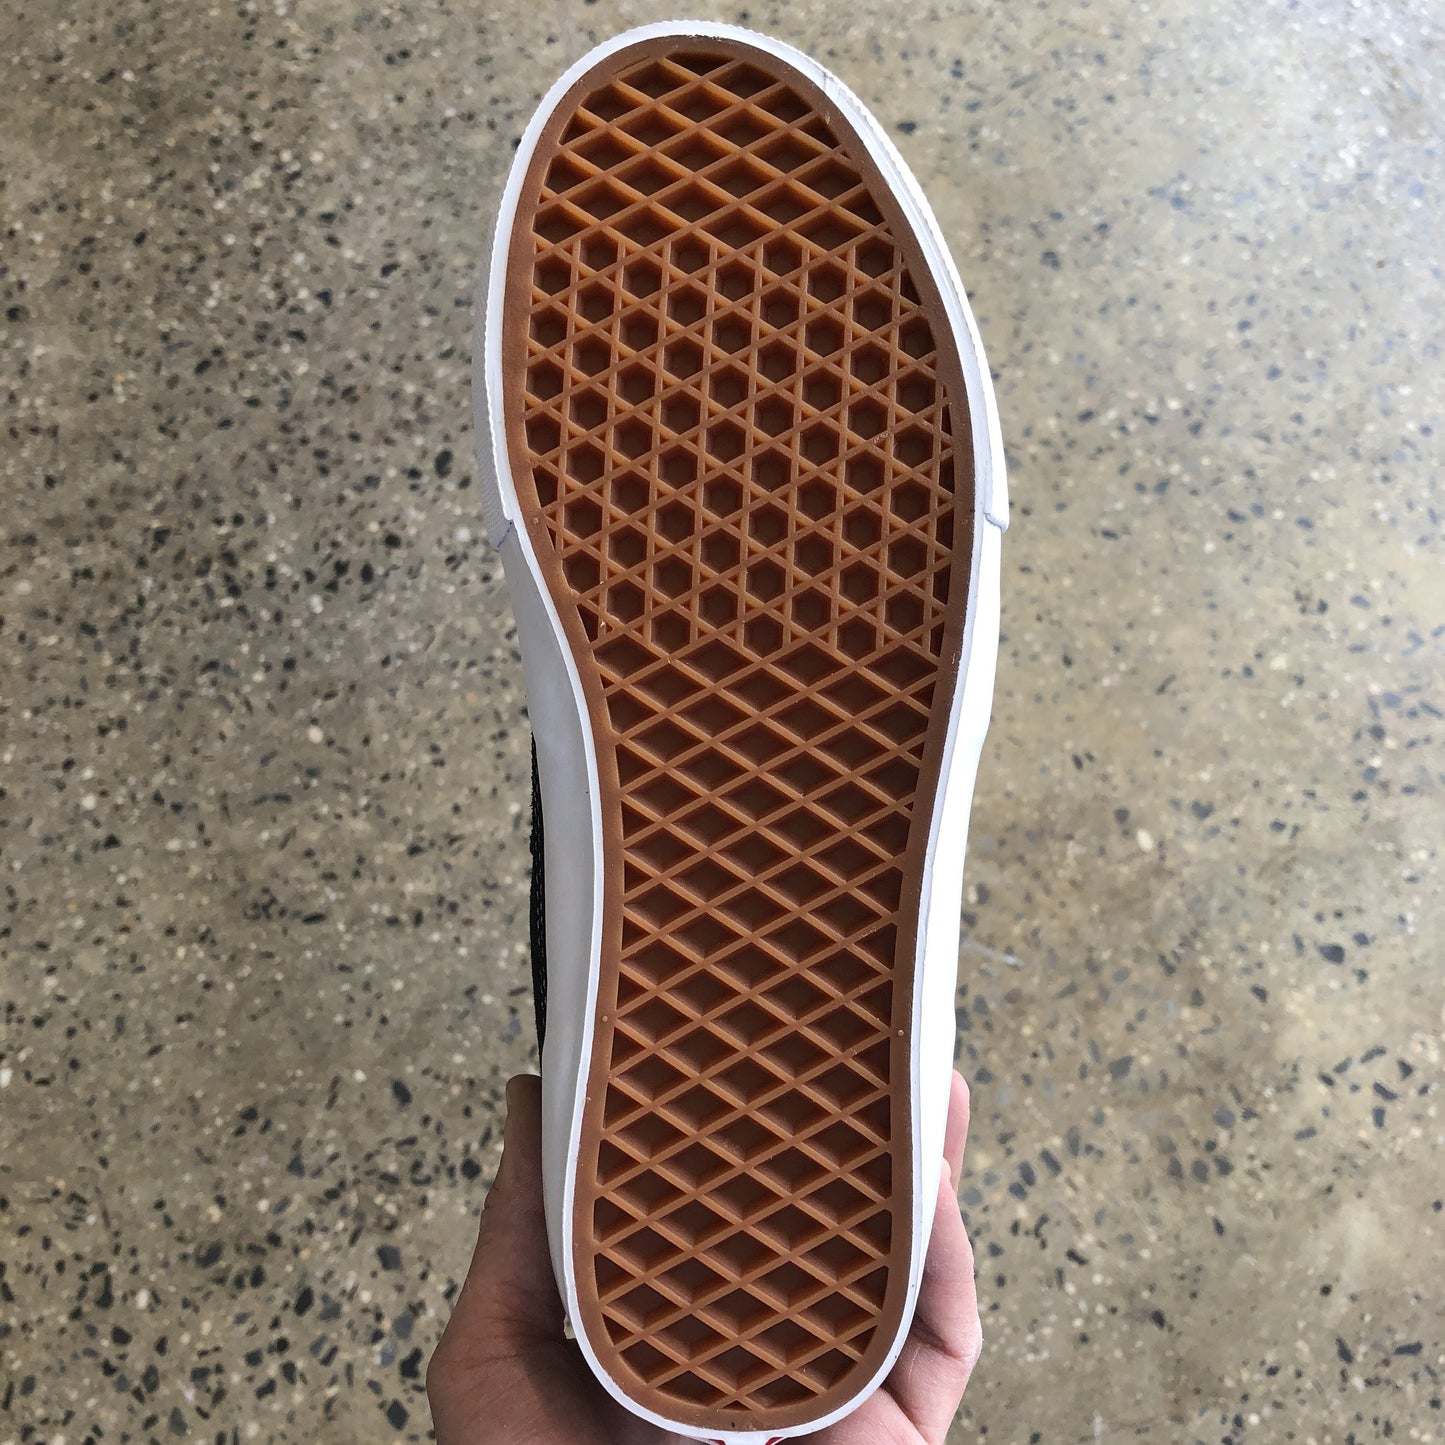 View of classic vans gum rubber waffle sole